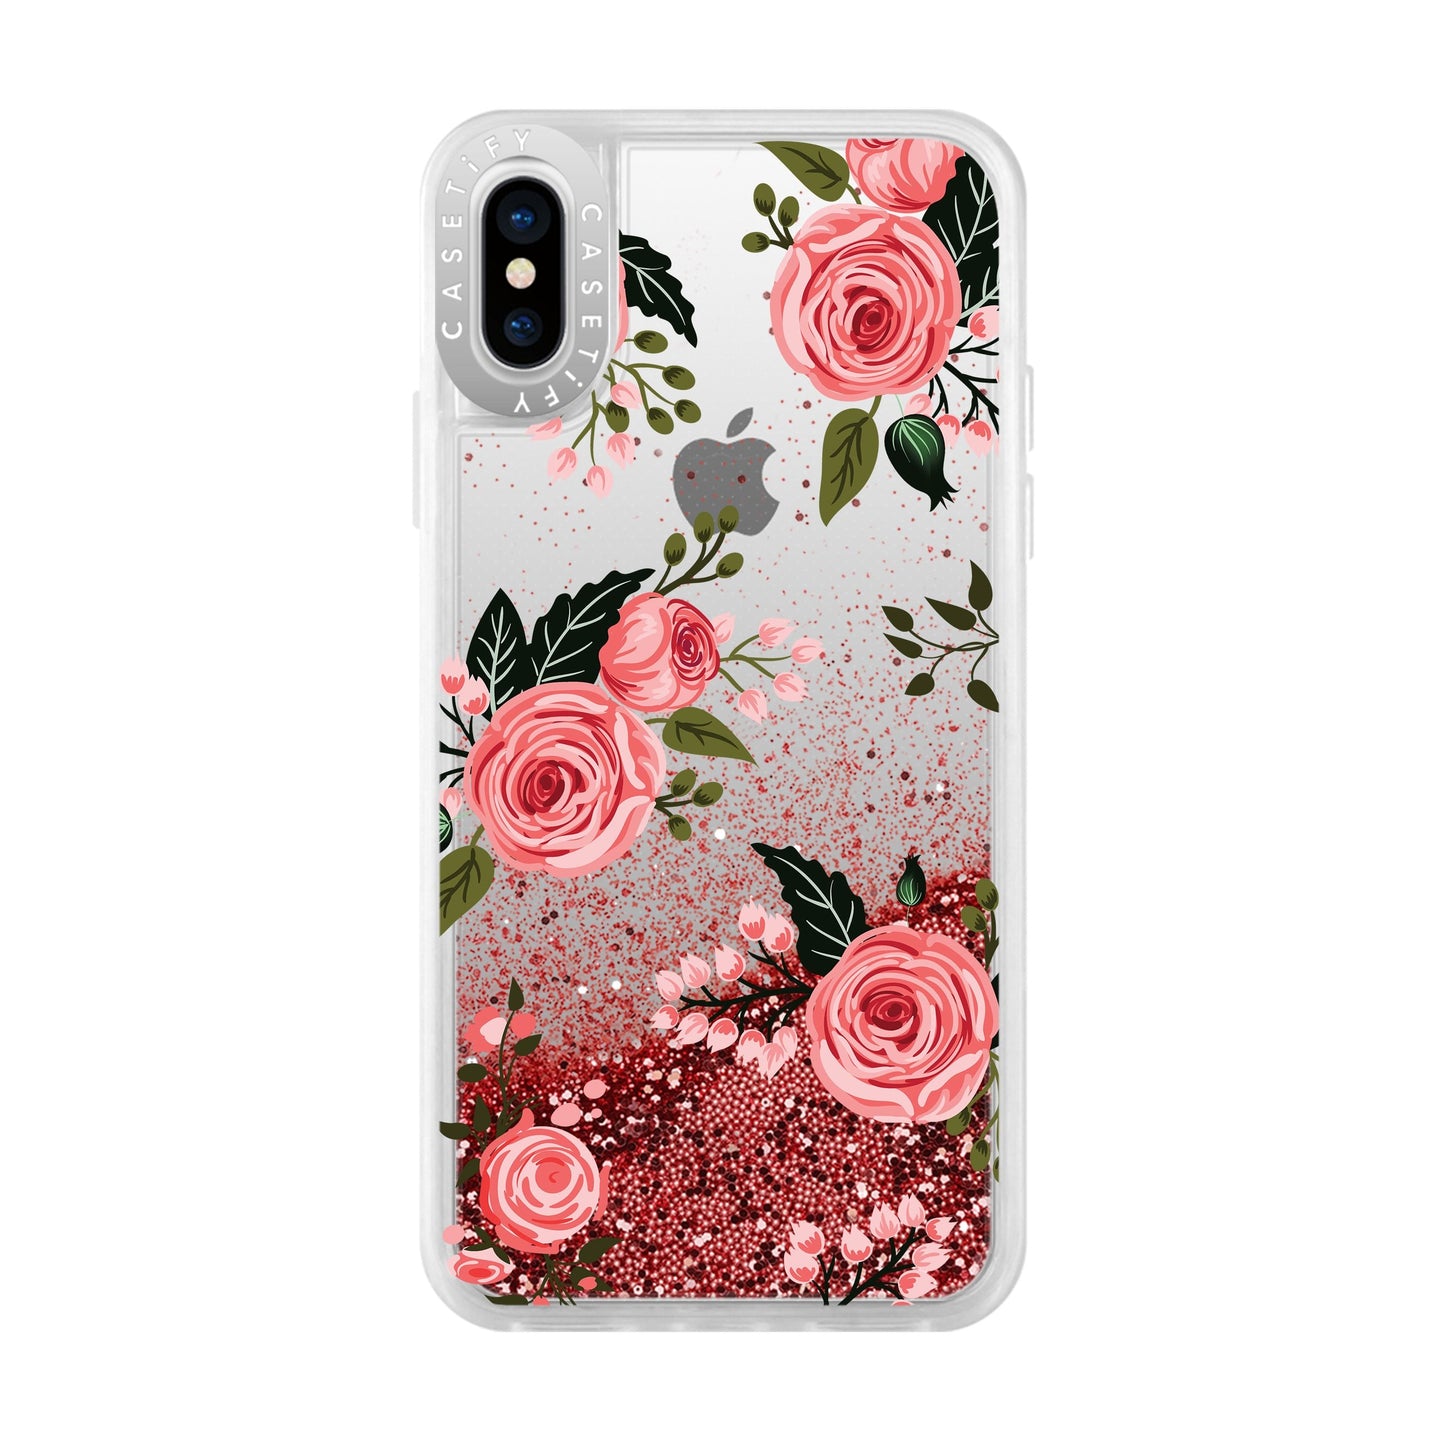 Casetify - Glitter Case Pink Roses (Pink) for iPhone Xs/X - GekkoTech